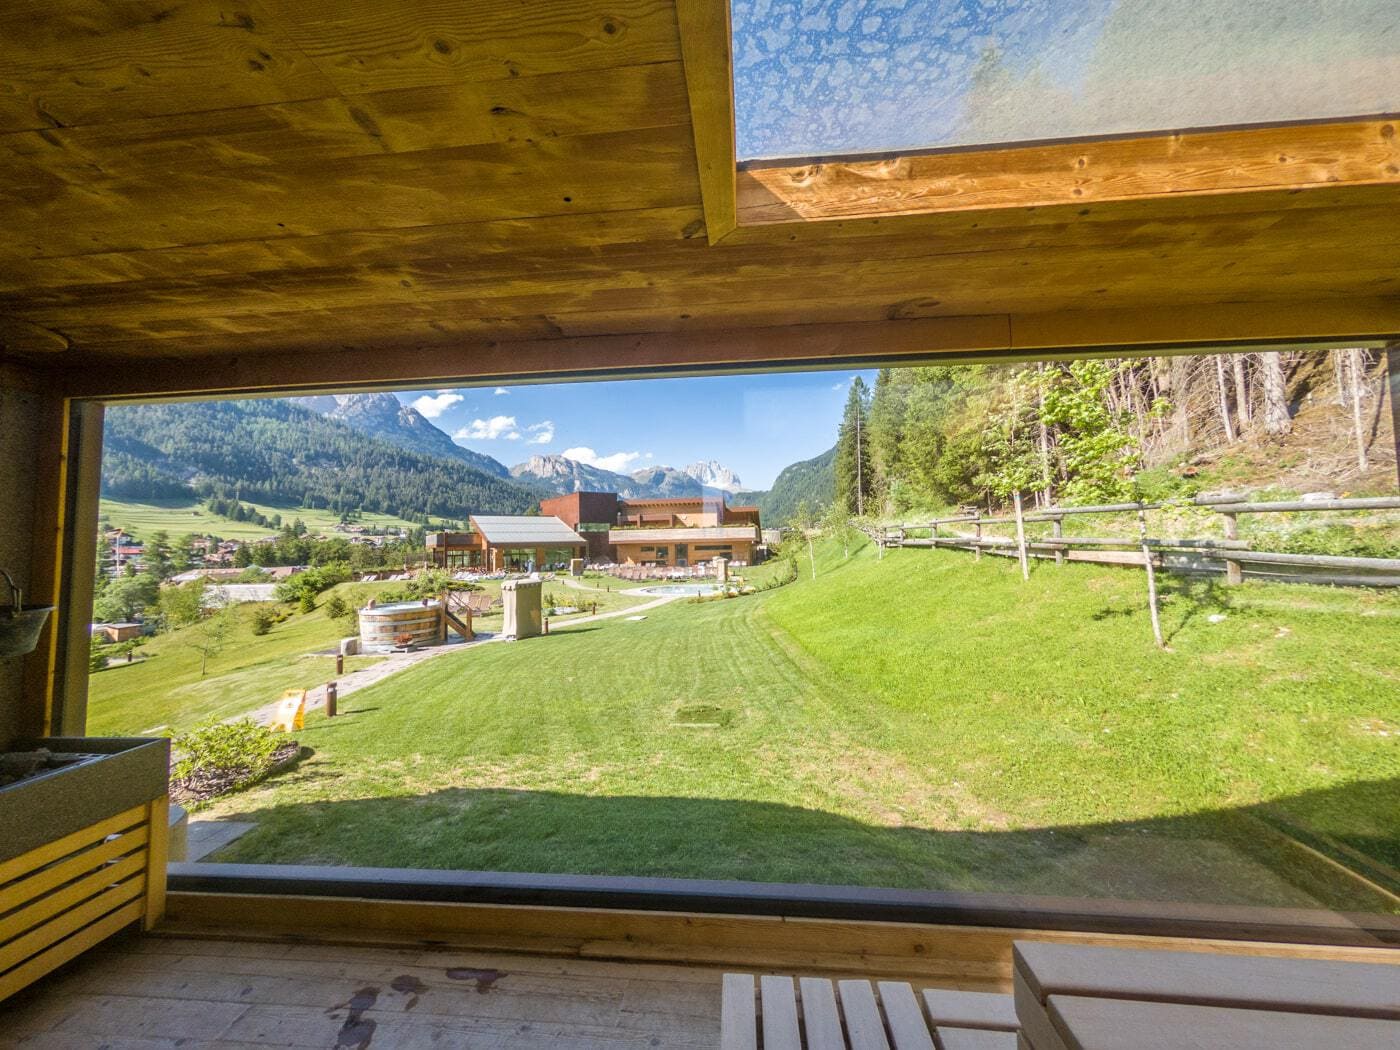 view from inside a sauna room on the lawn of a spa in val di fassa